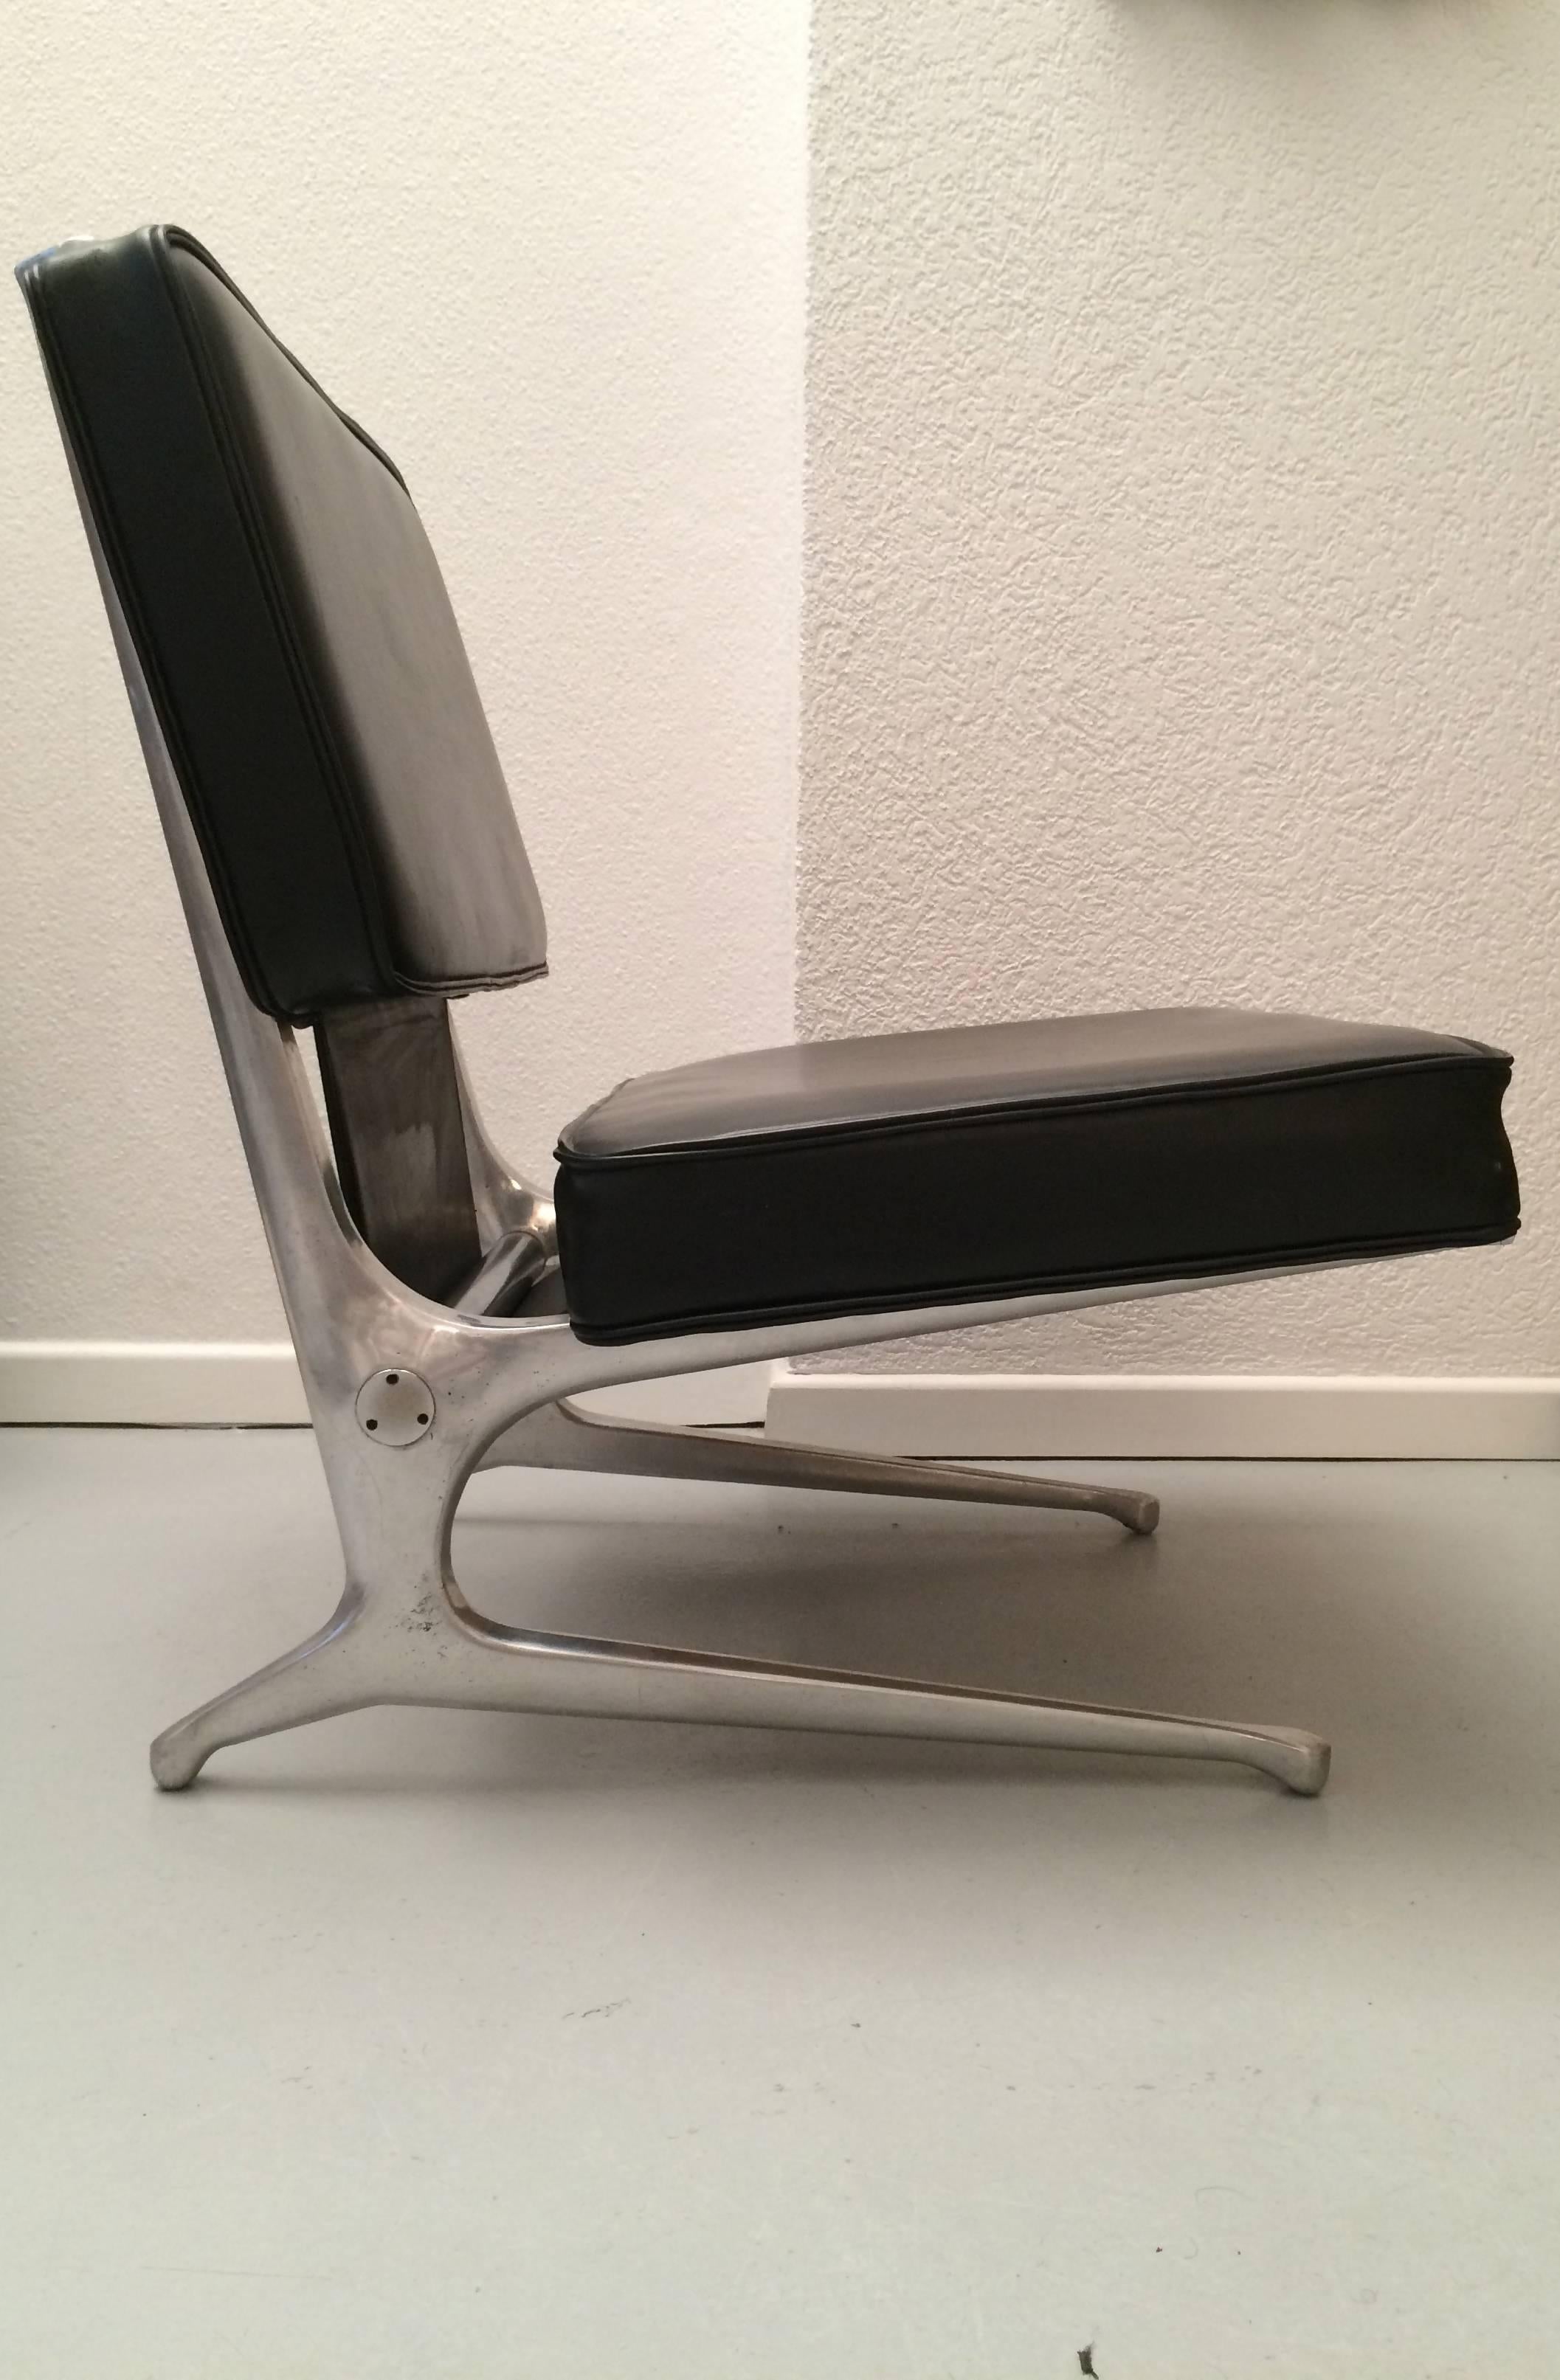 1960s sculptural cast aluminum and vinyl lounge chair.
Unknown origin. 
Nice quality and details.